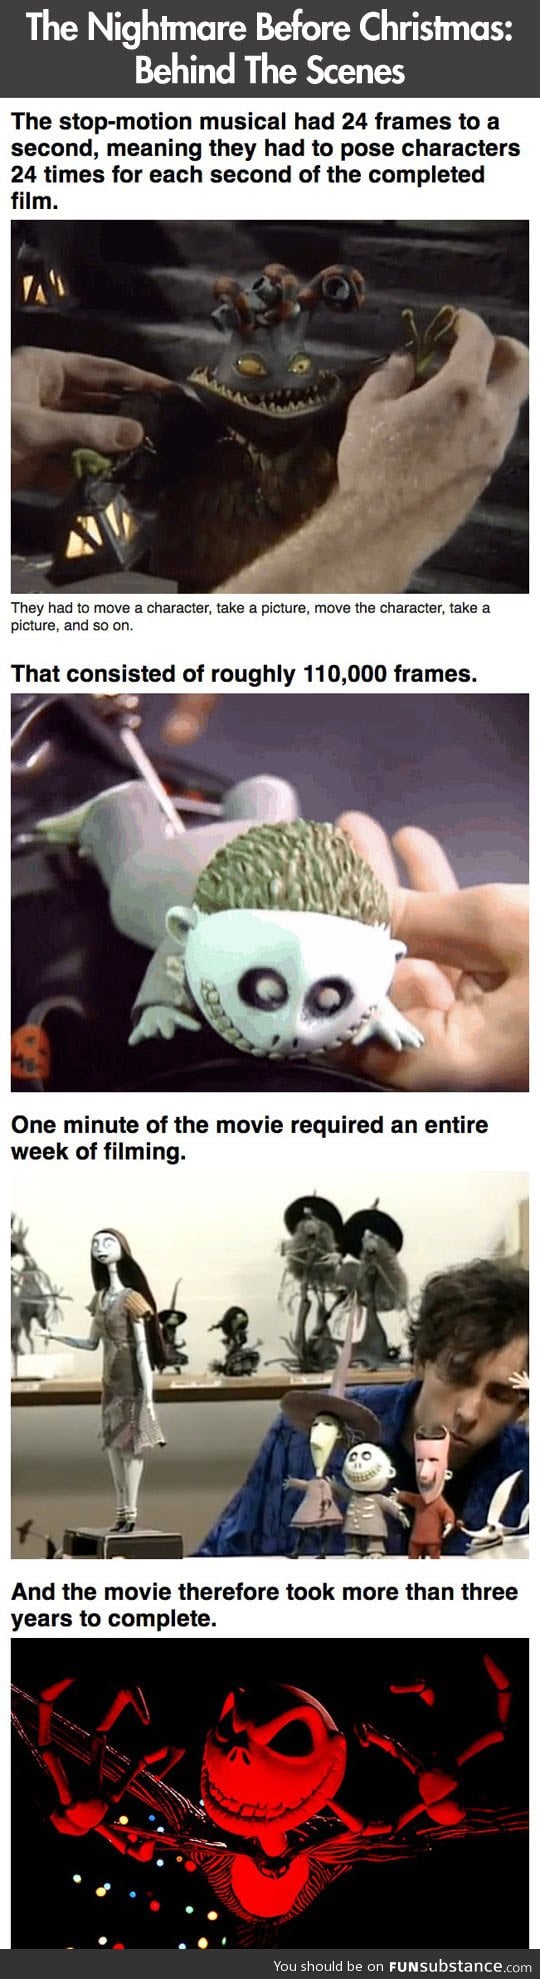 Facts you didn't know about The Nightmare Before Christmas